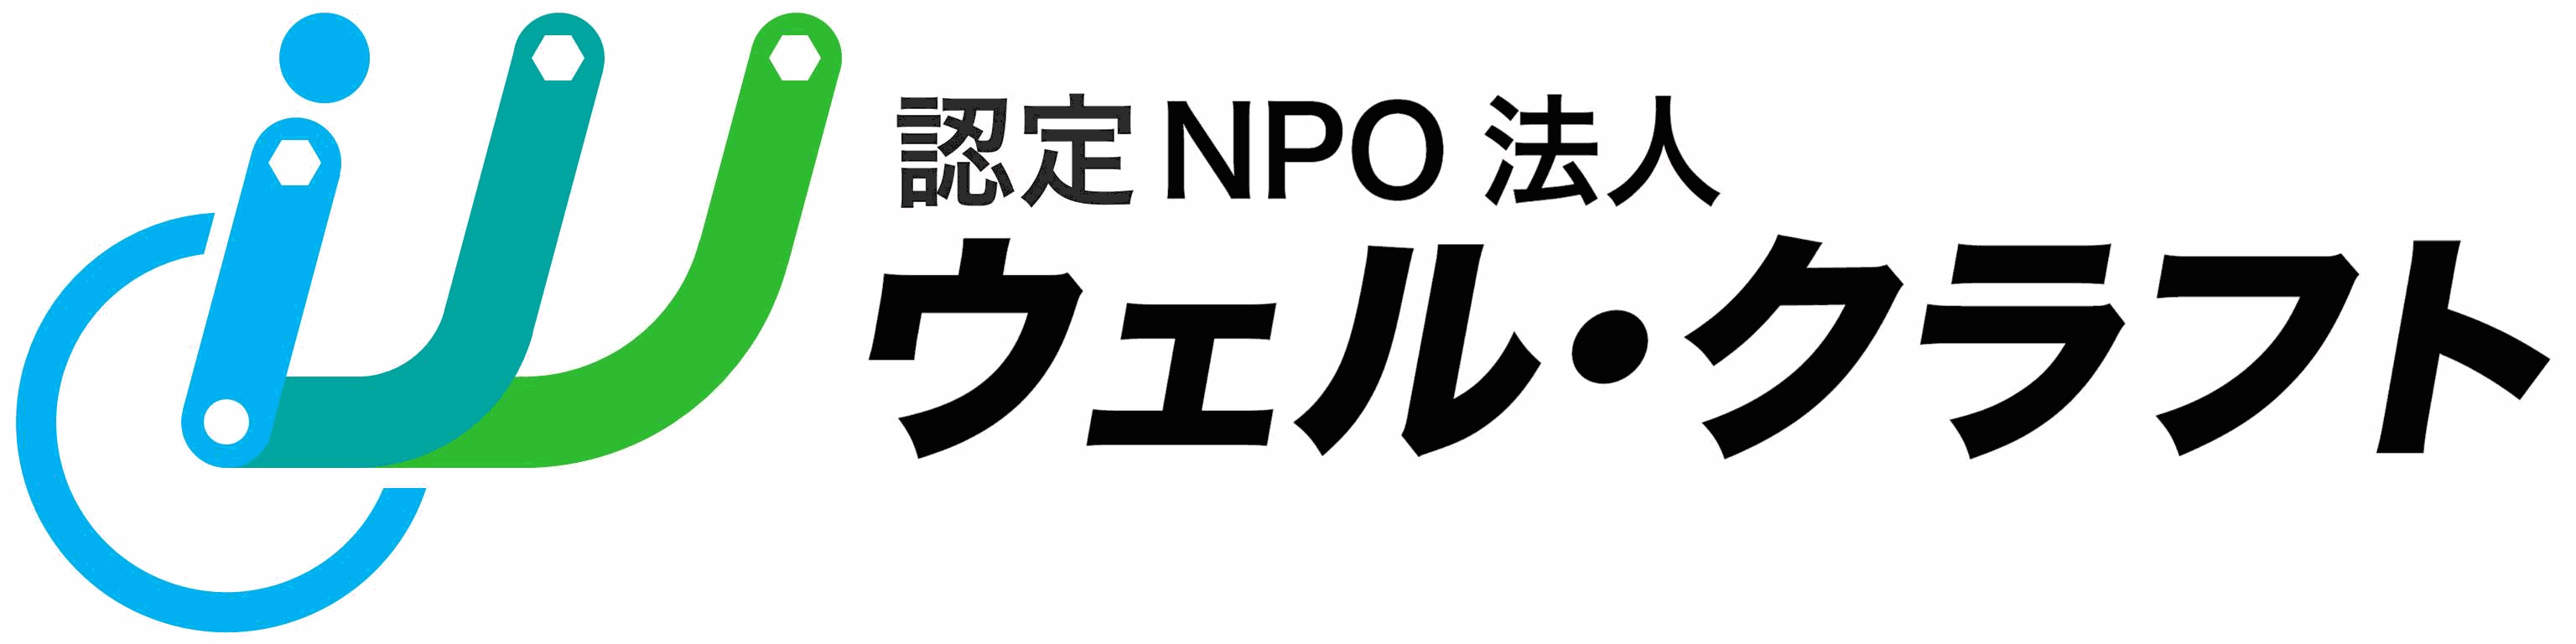 NPO法人 ウェル・クラフト